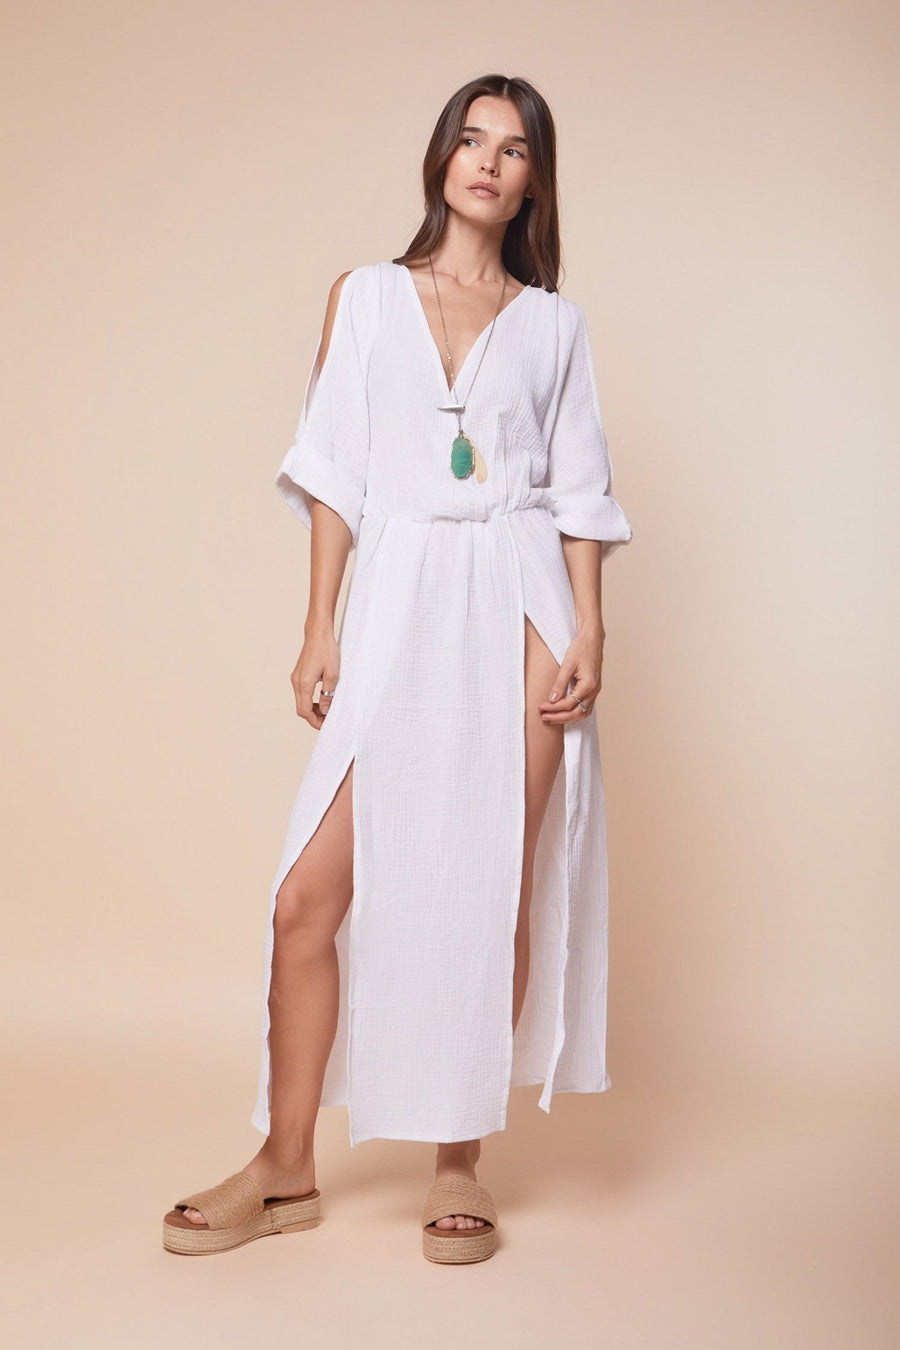 White cotton Cover-up - nahlaelalfydesigns